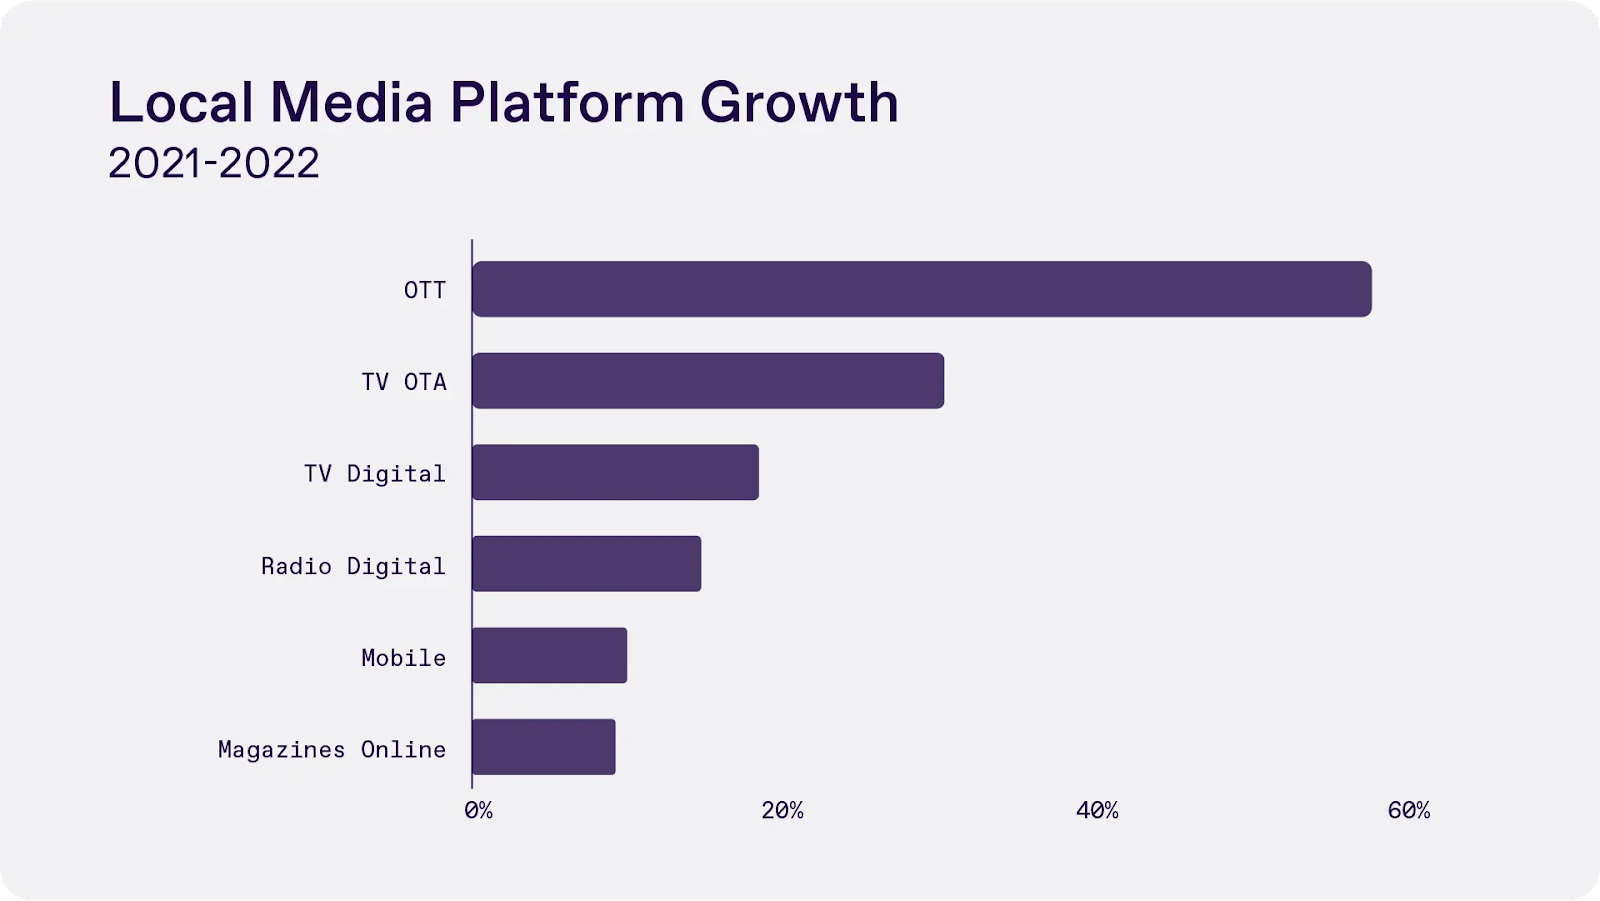 graph showing local media platform growth from 2021 to 2022